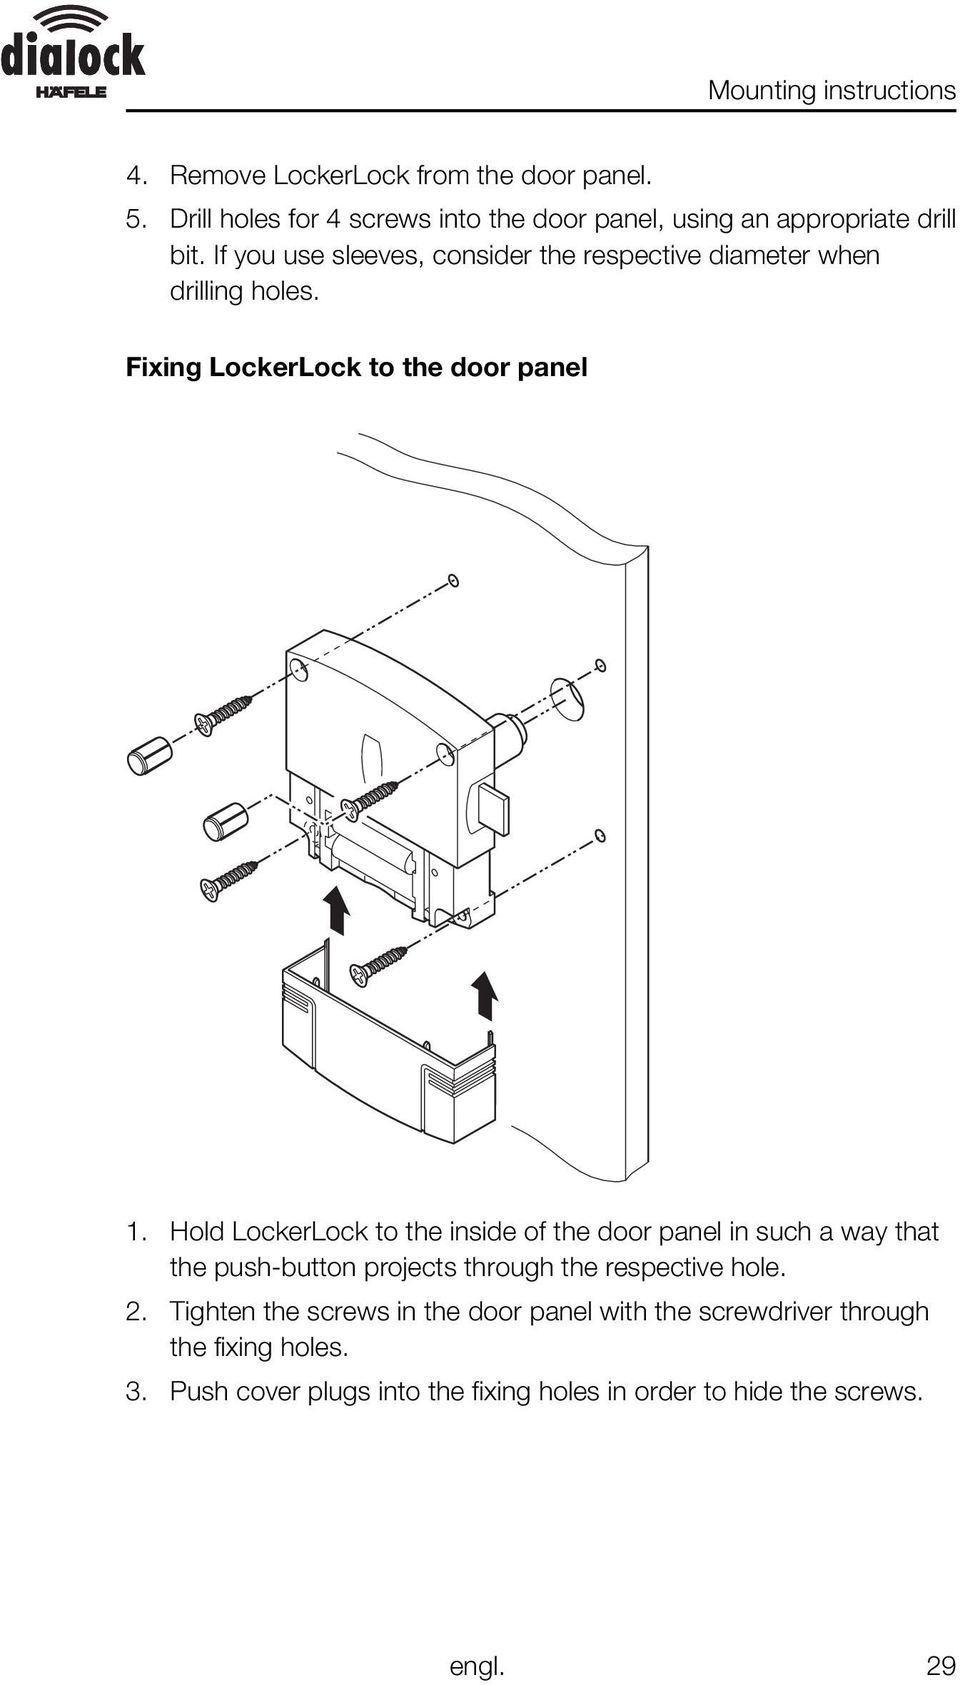 Hold LockerLock to the inside of the door panel in such a way that the push-button projects through the respective hole. 2.